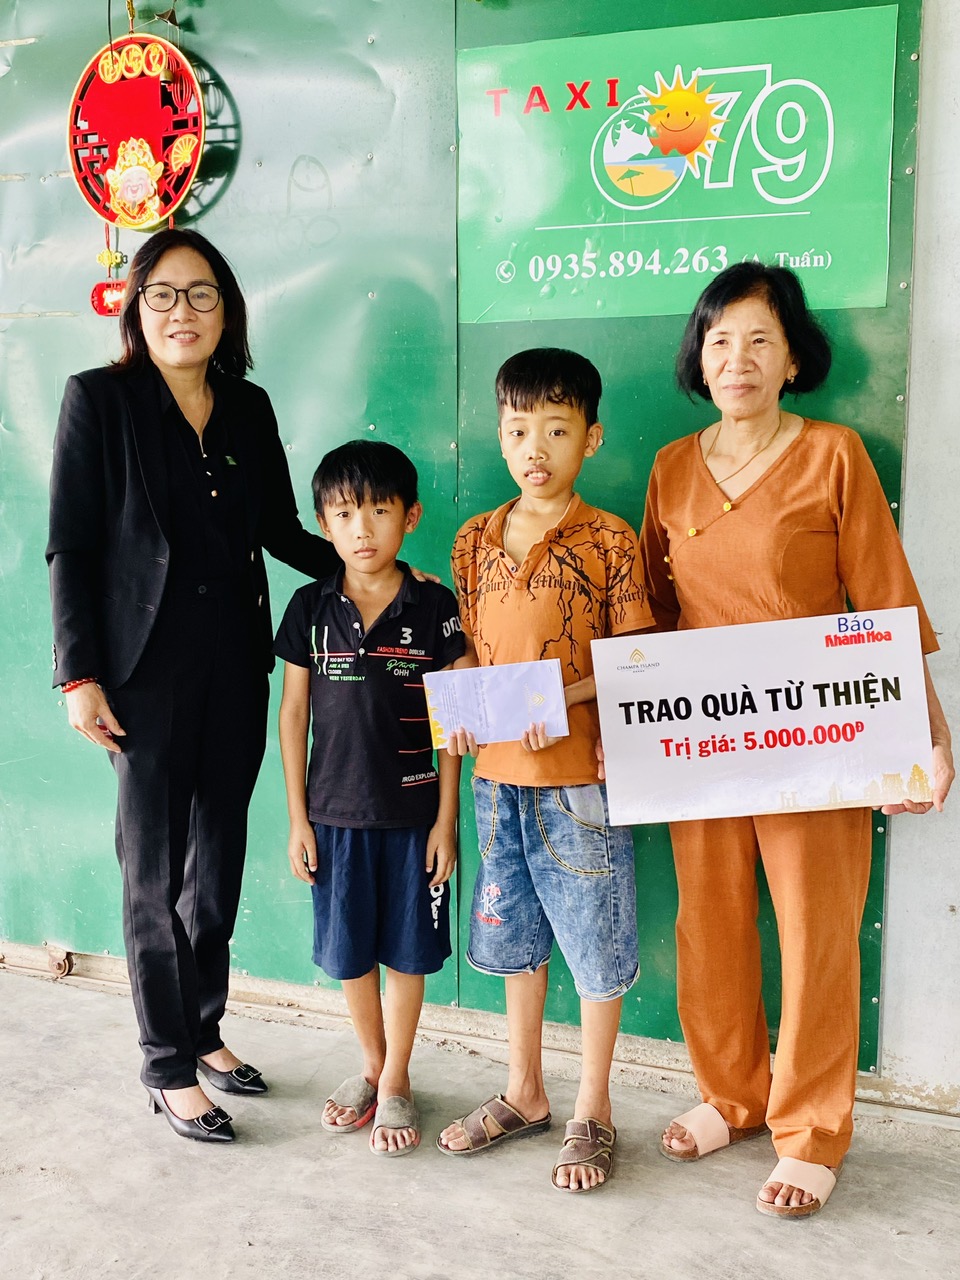 The representative of Champagroup Investment Joint Stock Company - Champa Island Nha Trang giving the donation to the family of the 2 siblings

